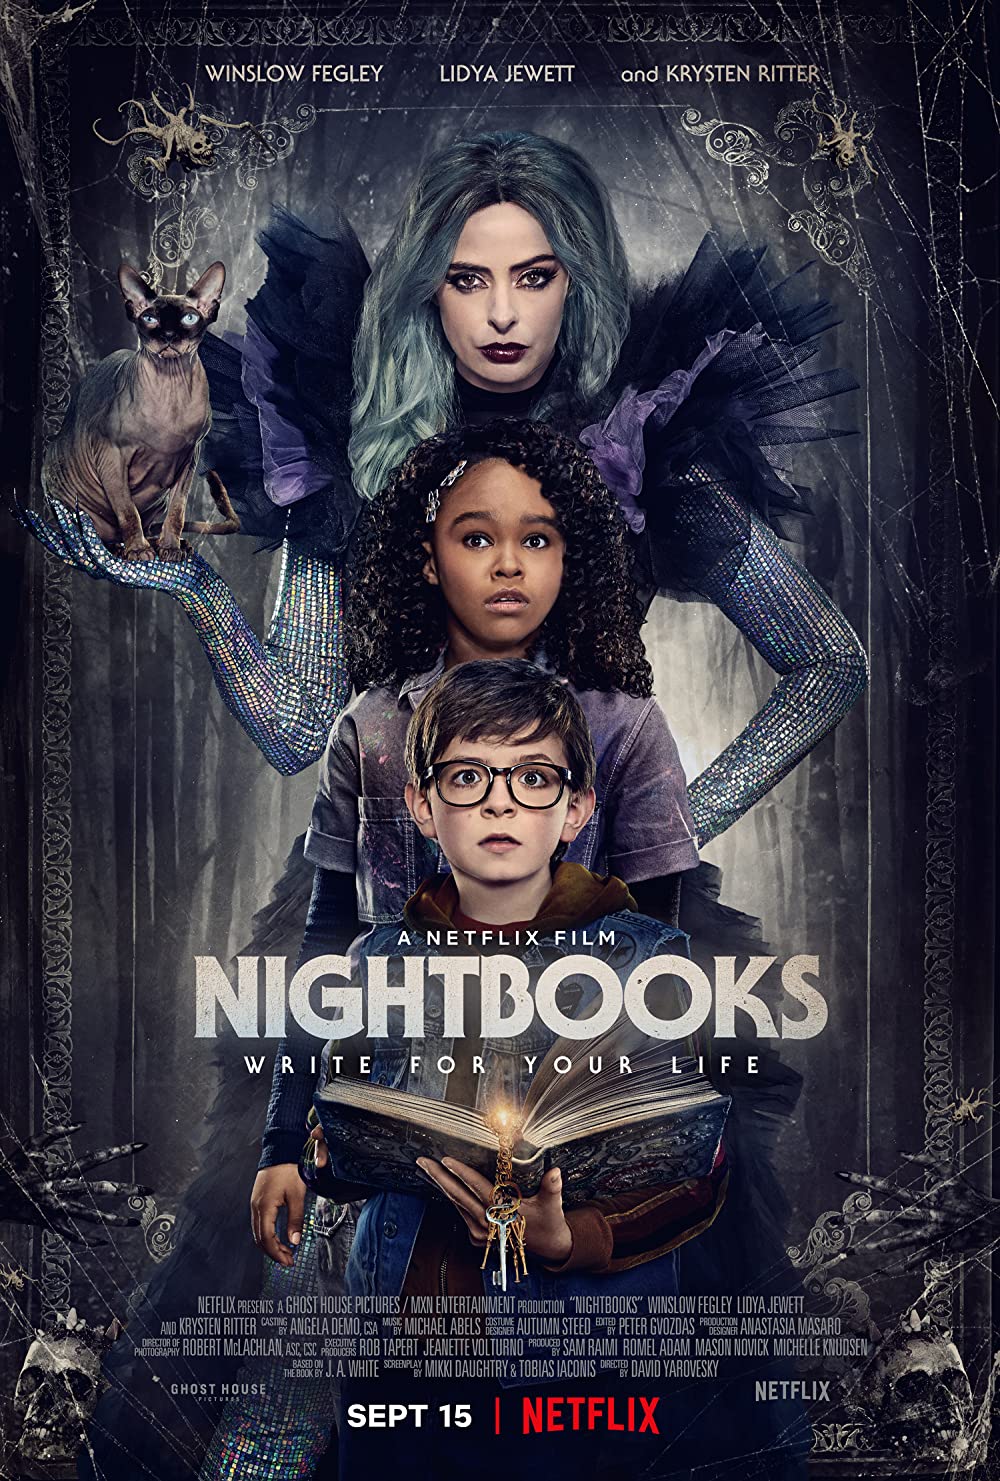 Is Netflix's Nightbooks too scary for kids?